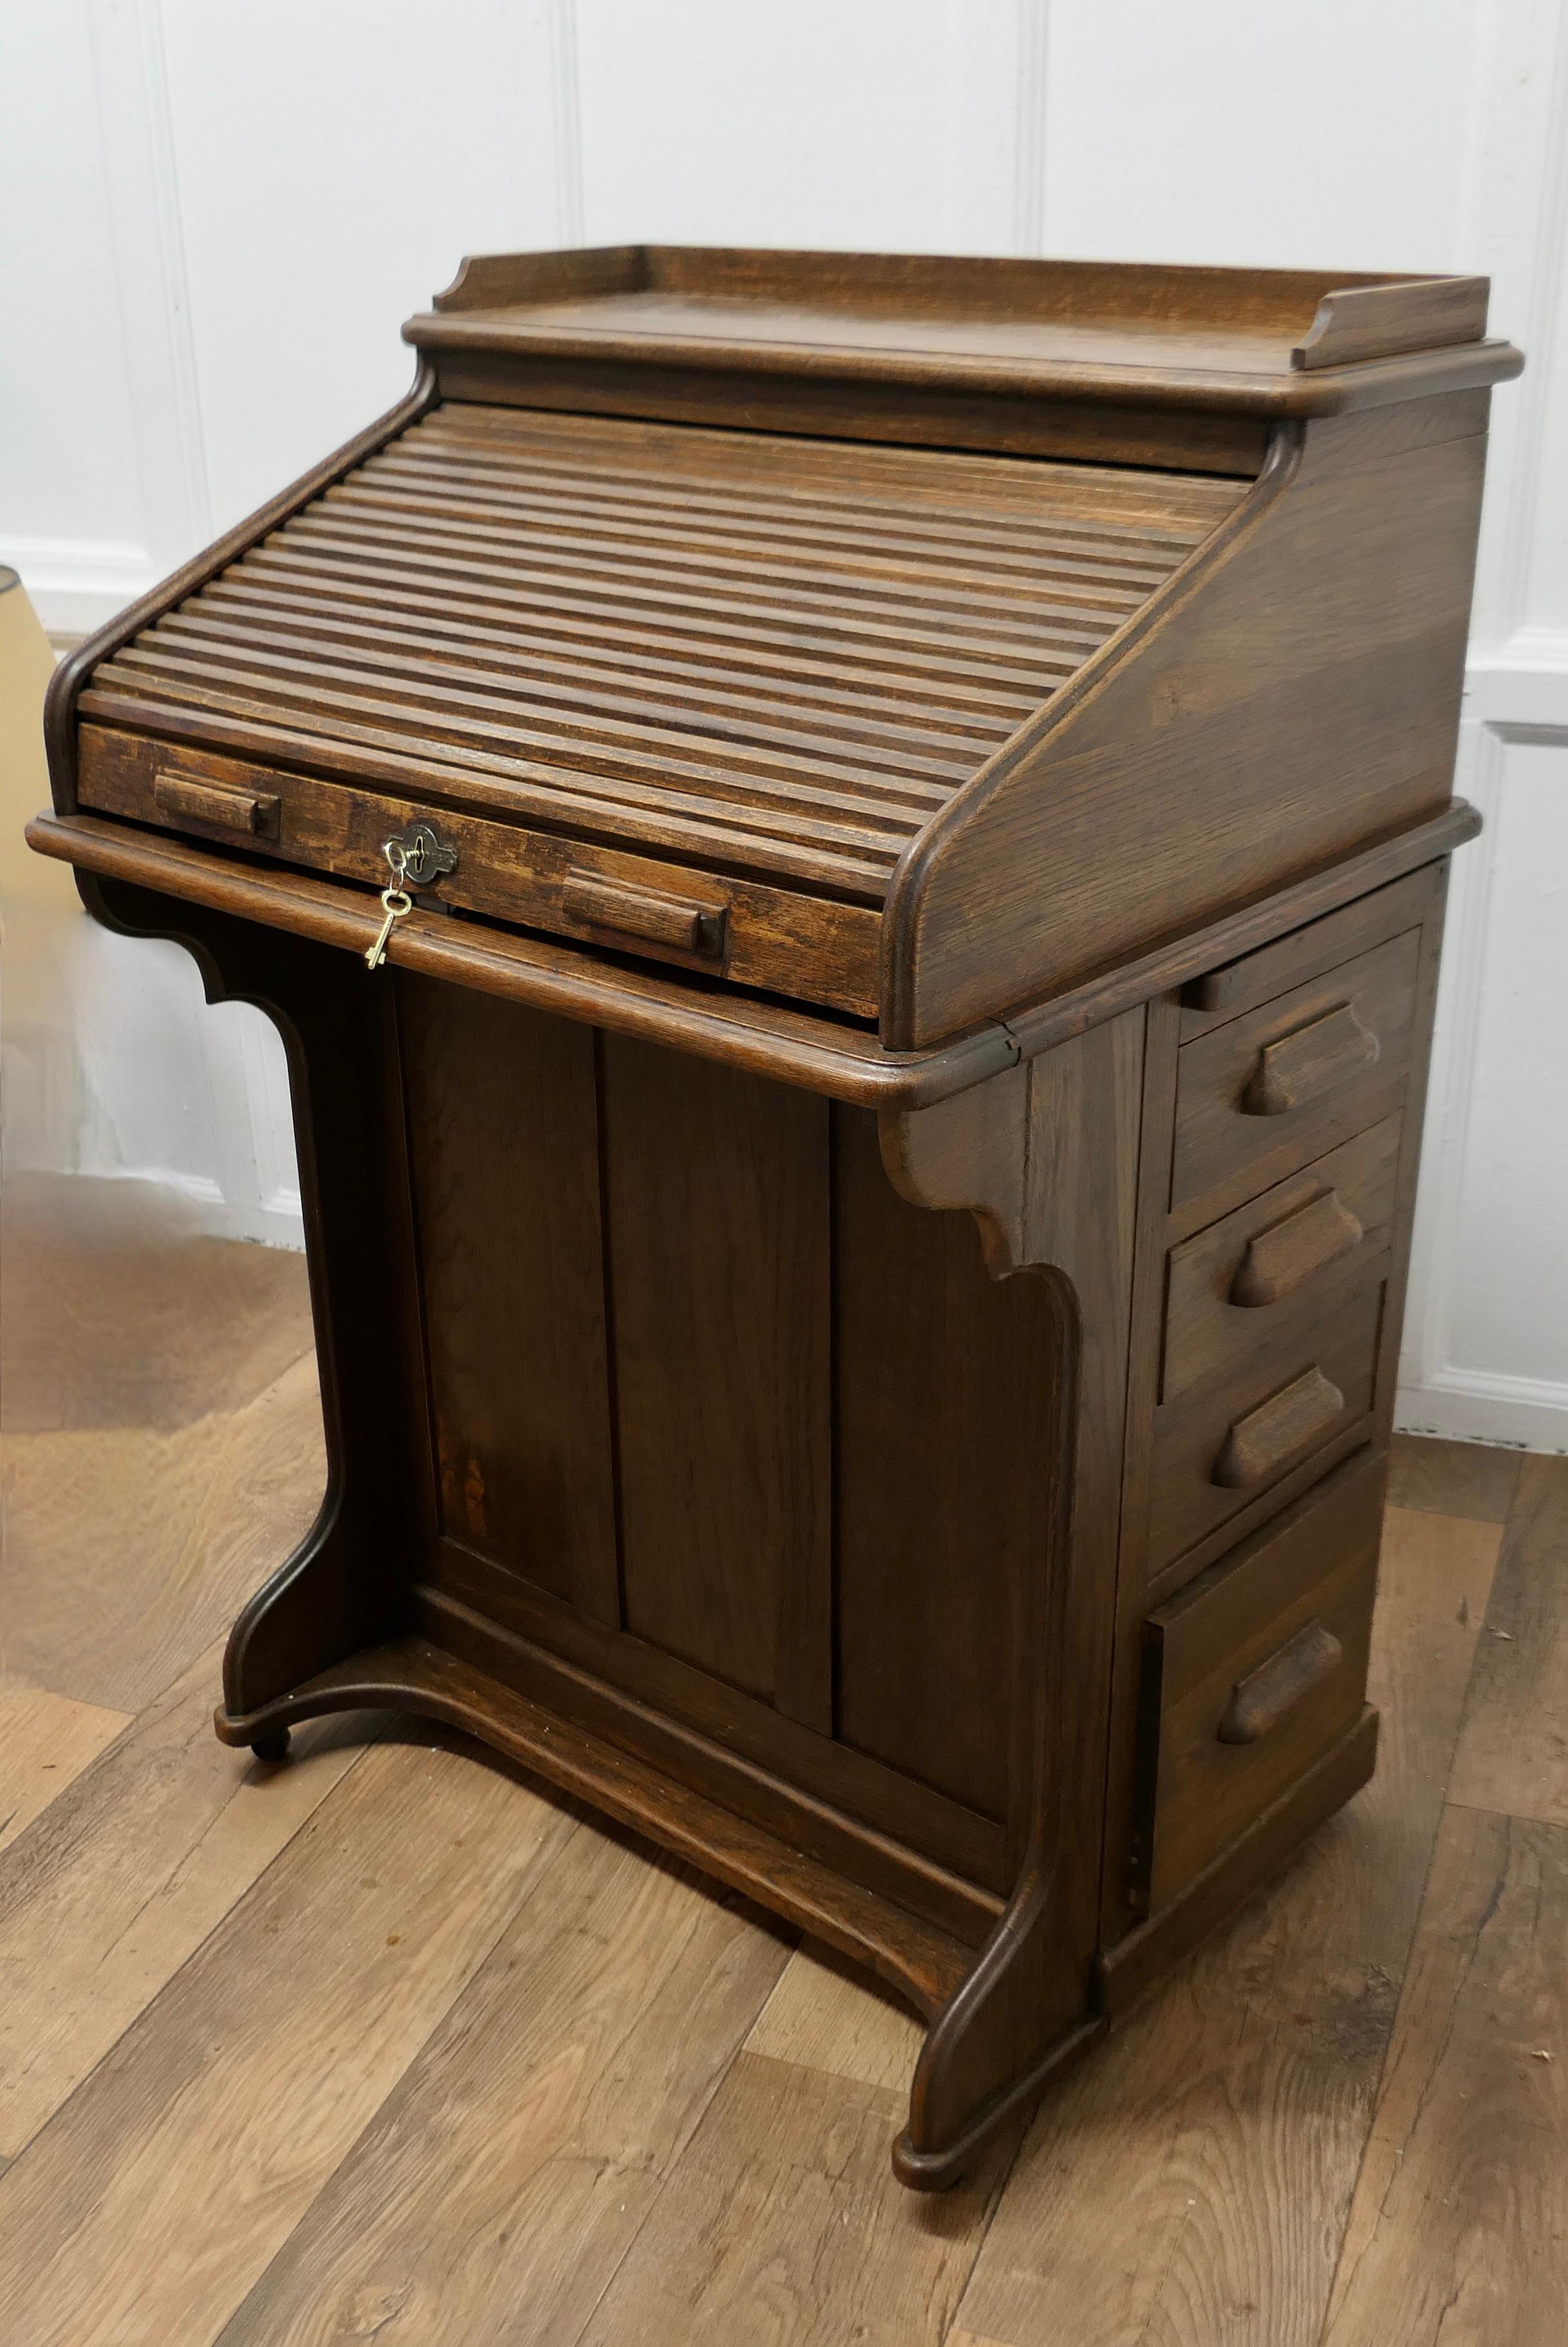 Lebus Art Deco Oak, Restaurant Roll Top Desk Greeter  

This Oak restaurant greeting station which is made by Lebus, has roll top tambour which conceals beneath it a fitted interior of pigeon holes, card index drawers and stationary compartments
It